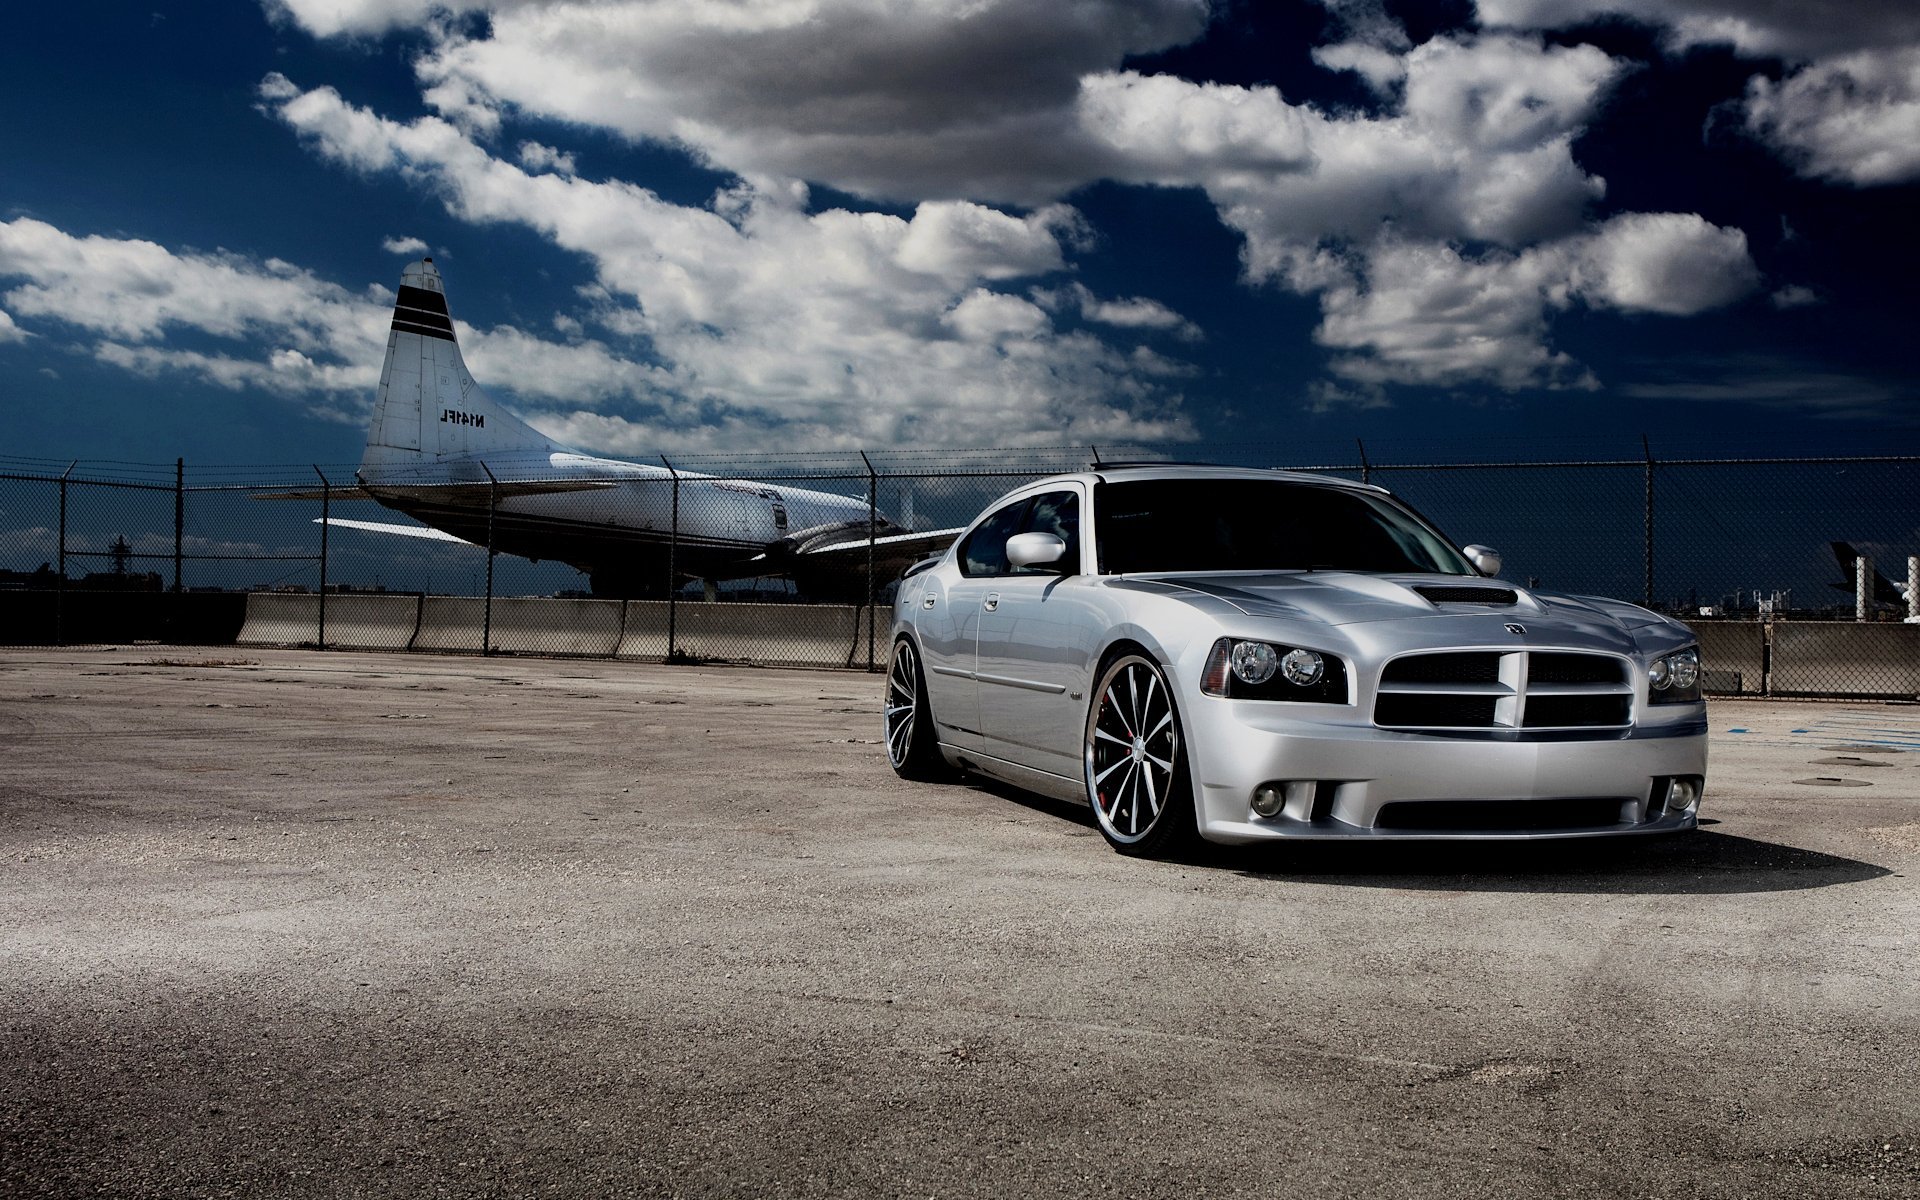 Dodge Charger Plane Clouds Cars Wallpaper